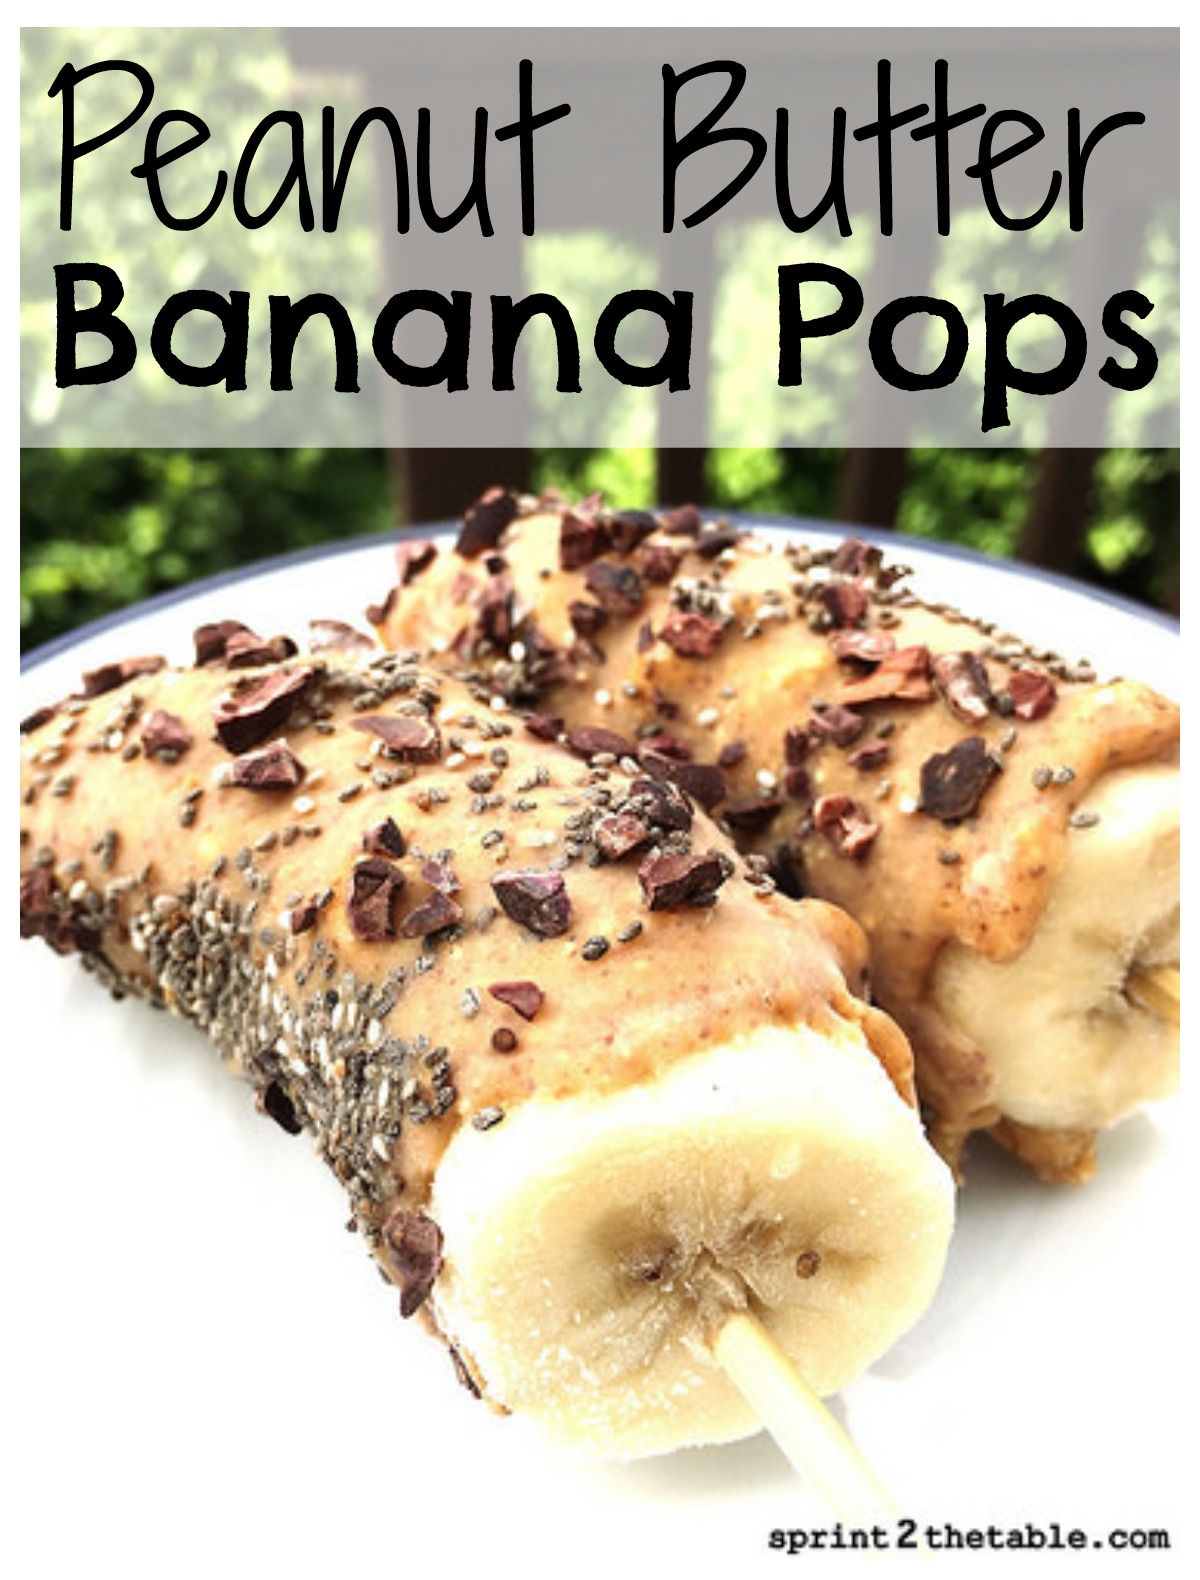 Peanut Butter Banana Pops - because A peanut butter banana pop in the heat of the summer couldn't sound more perfect!